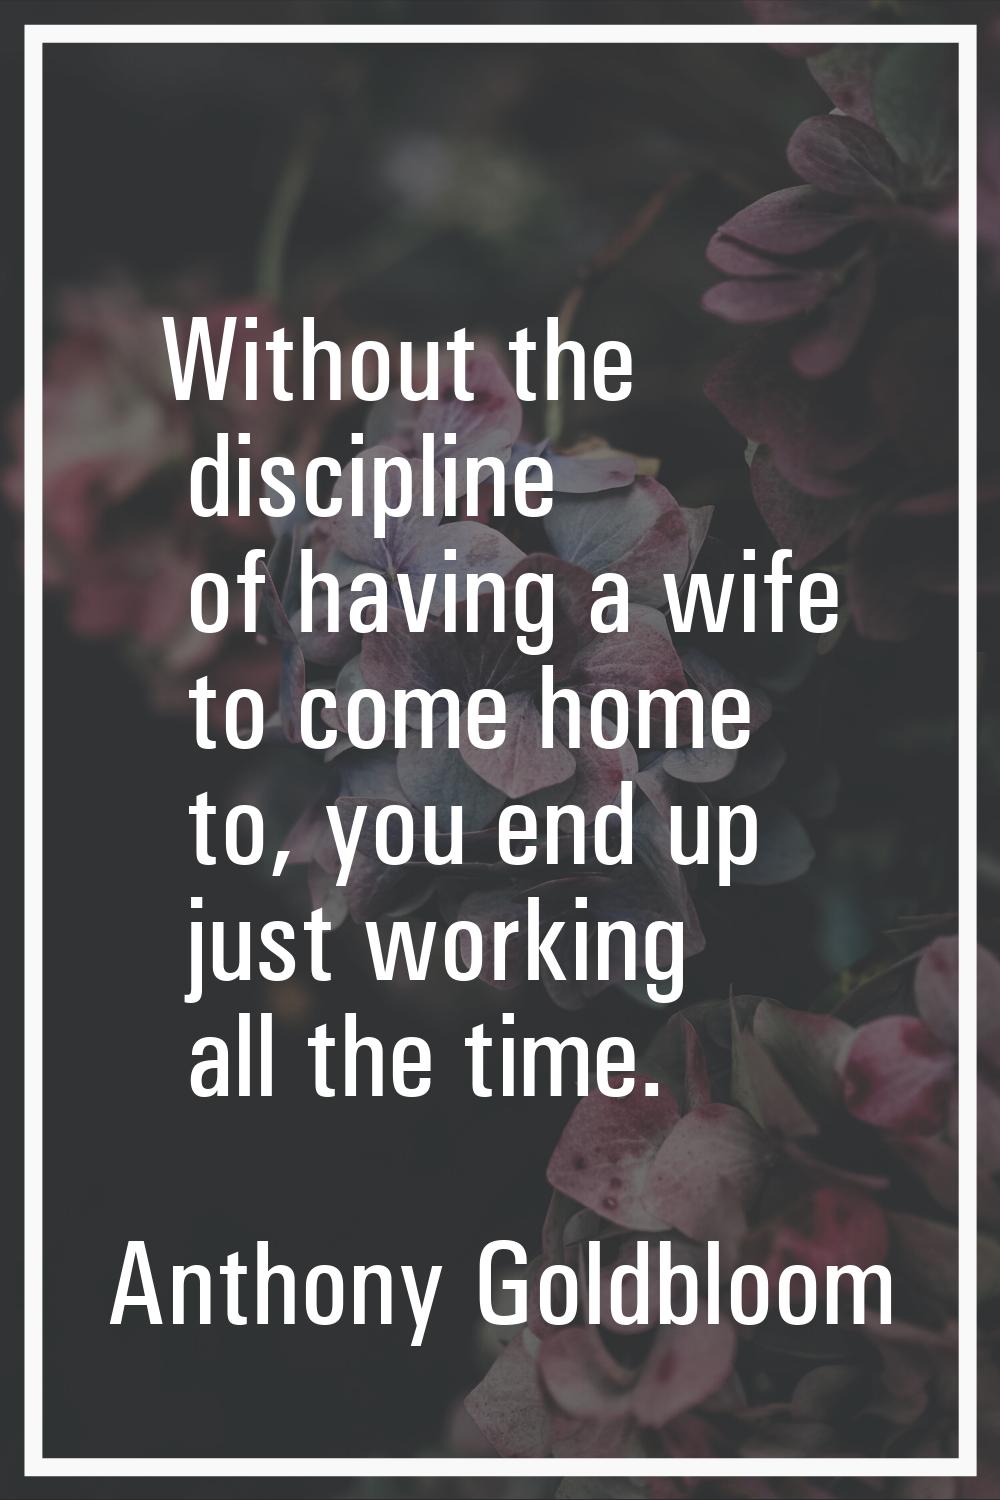 Without the discipline of having a wife to come home to, you end up just working all the time.